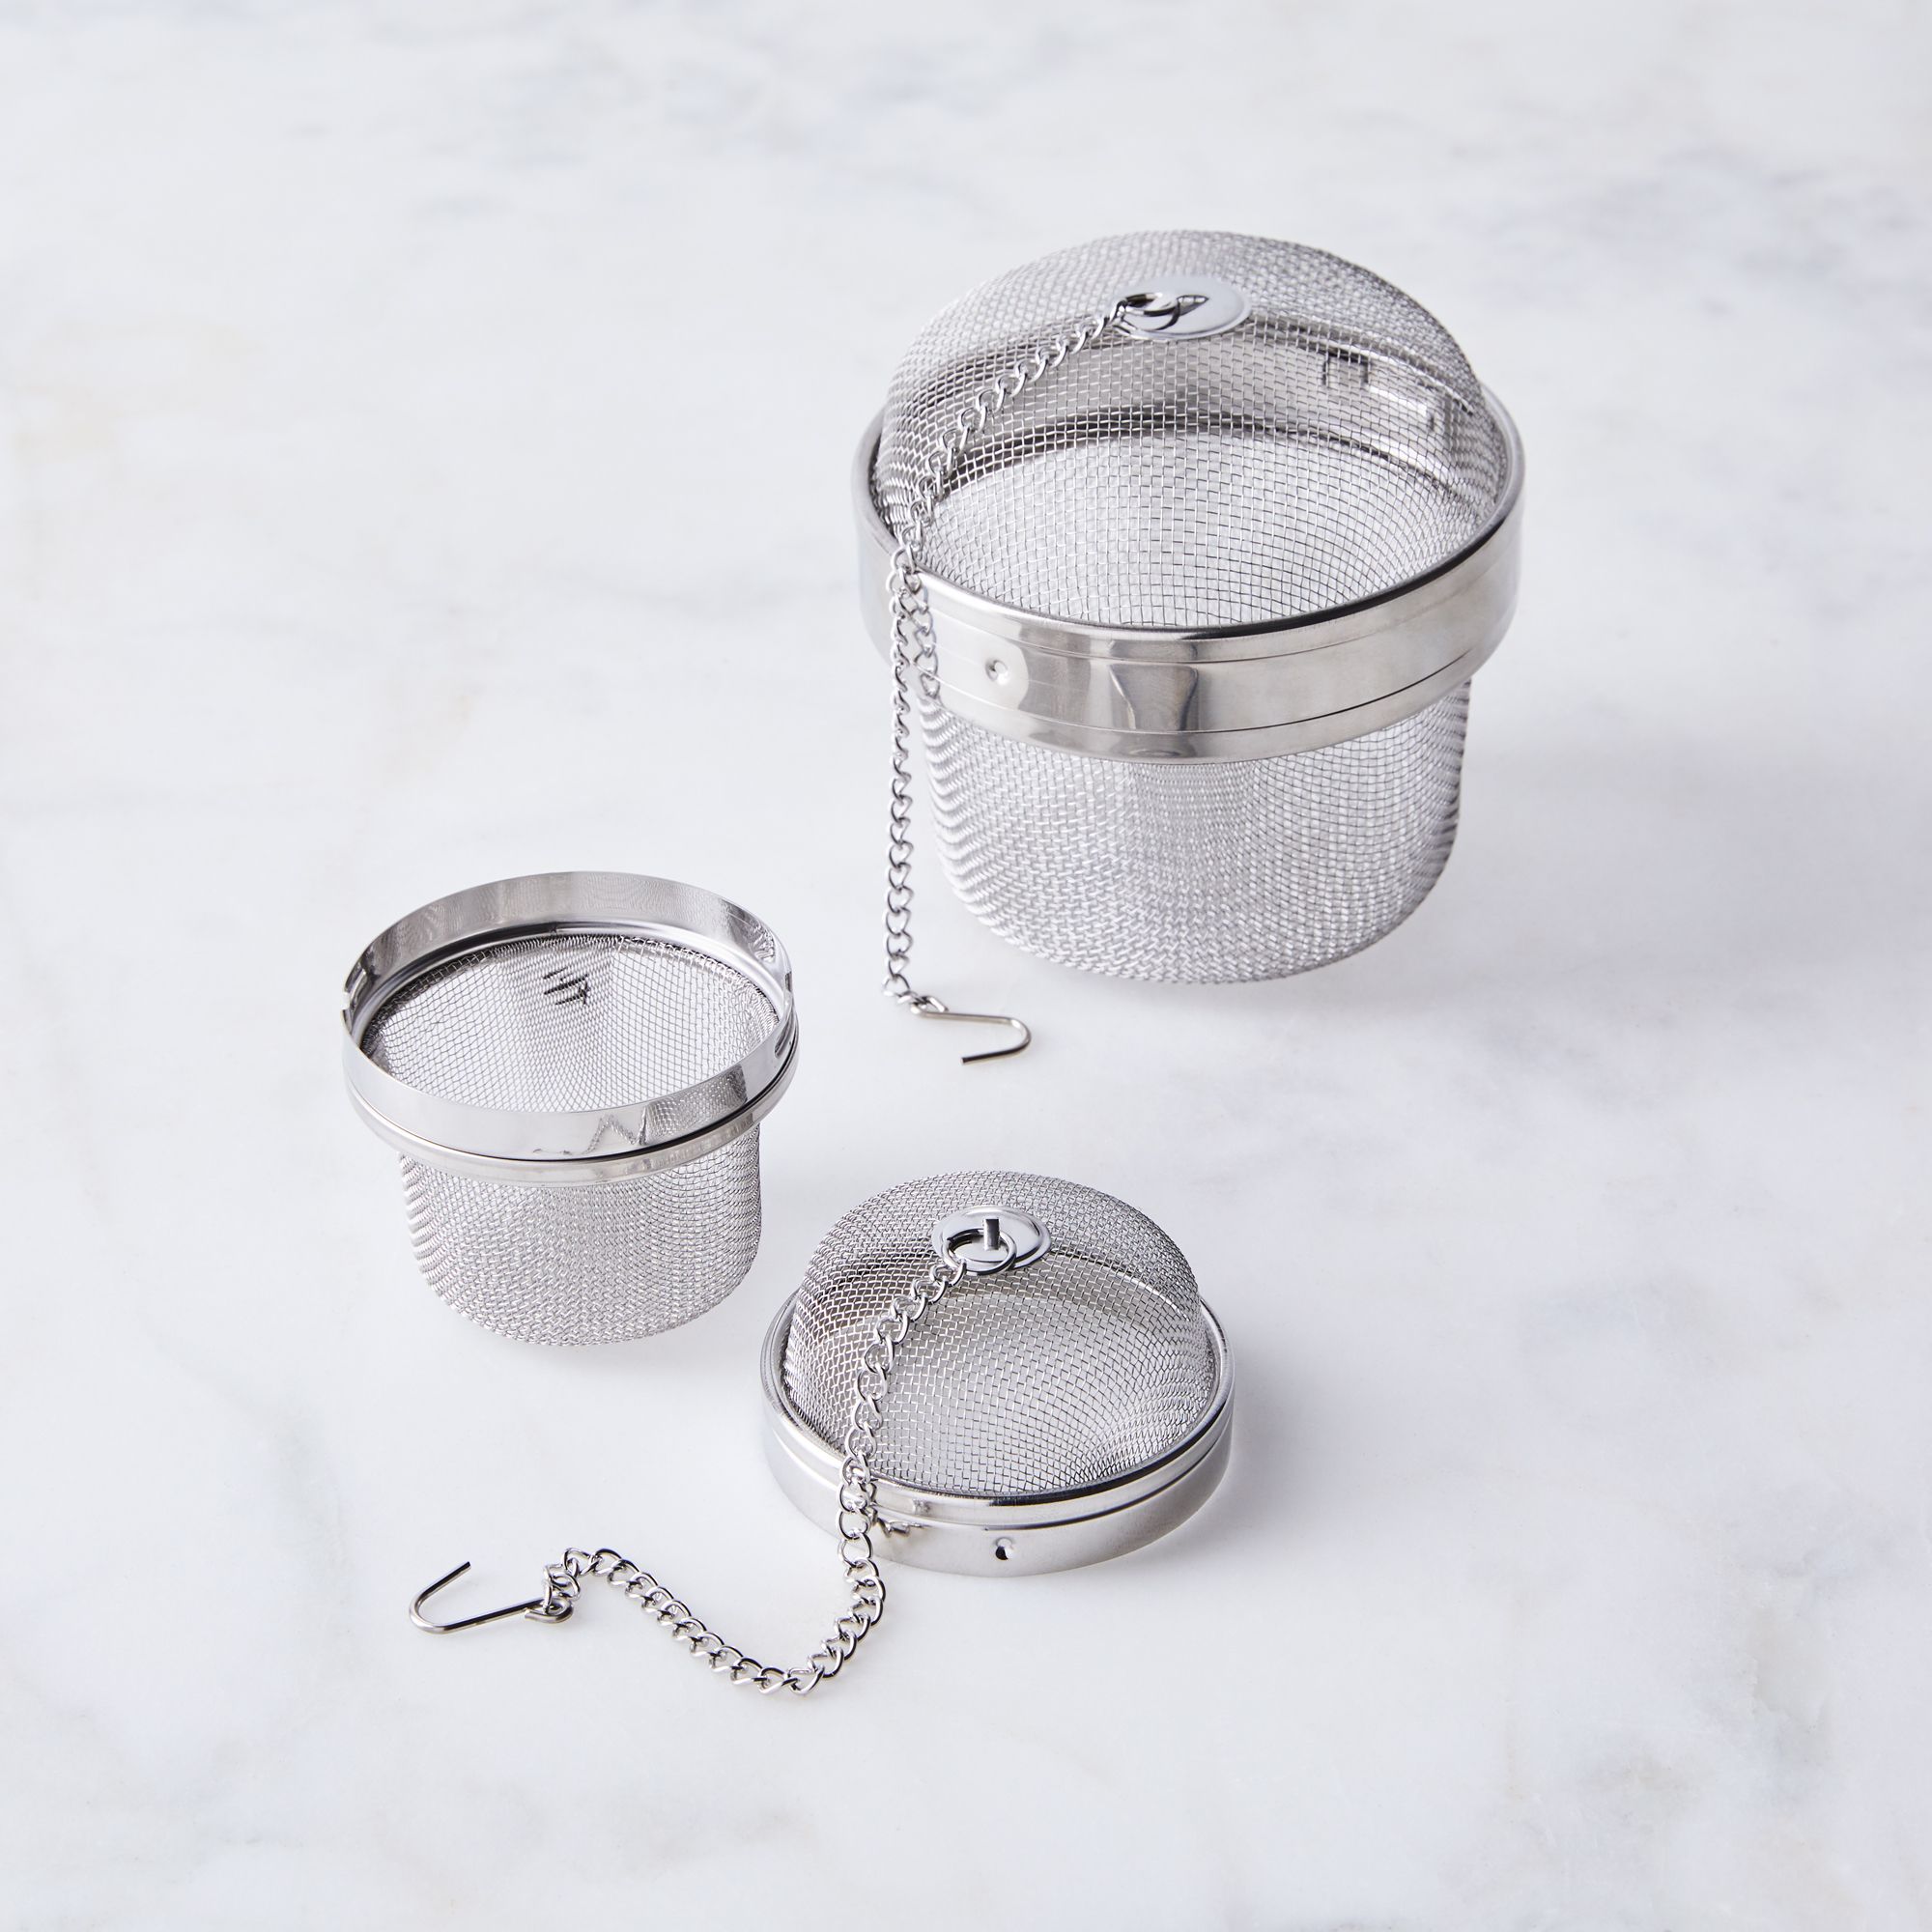 *** Set of 2 pieces *** Stainless steel peanut shaped tea infuser with tray 